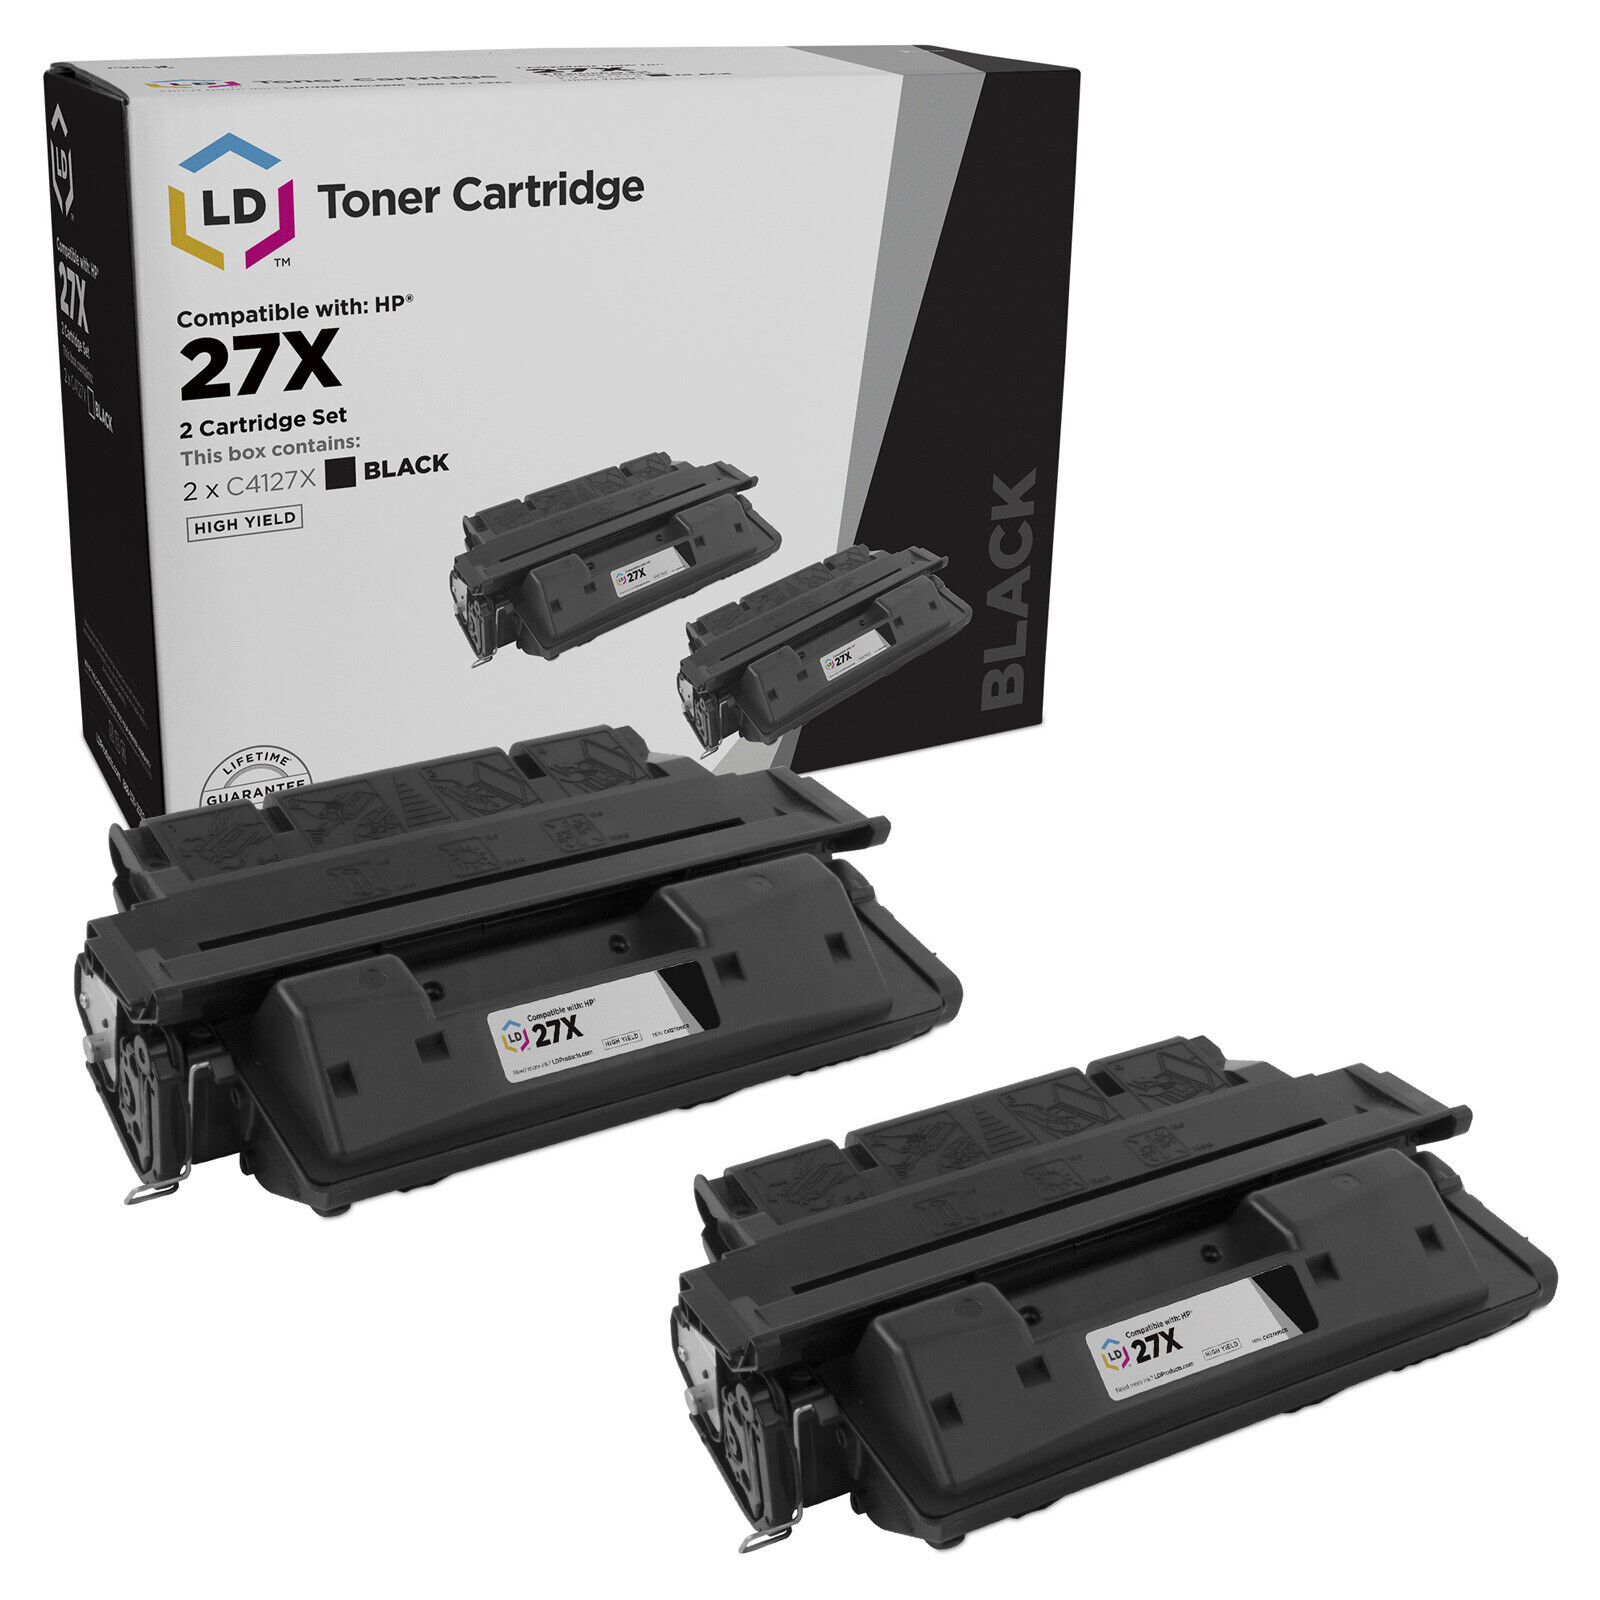 LD Reman Toner Replacement for HP 27X C4127X HY (Blk, 2-Pk)